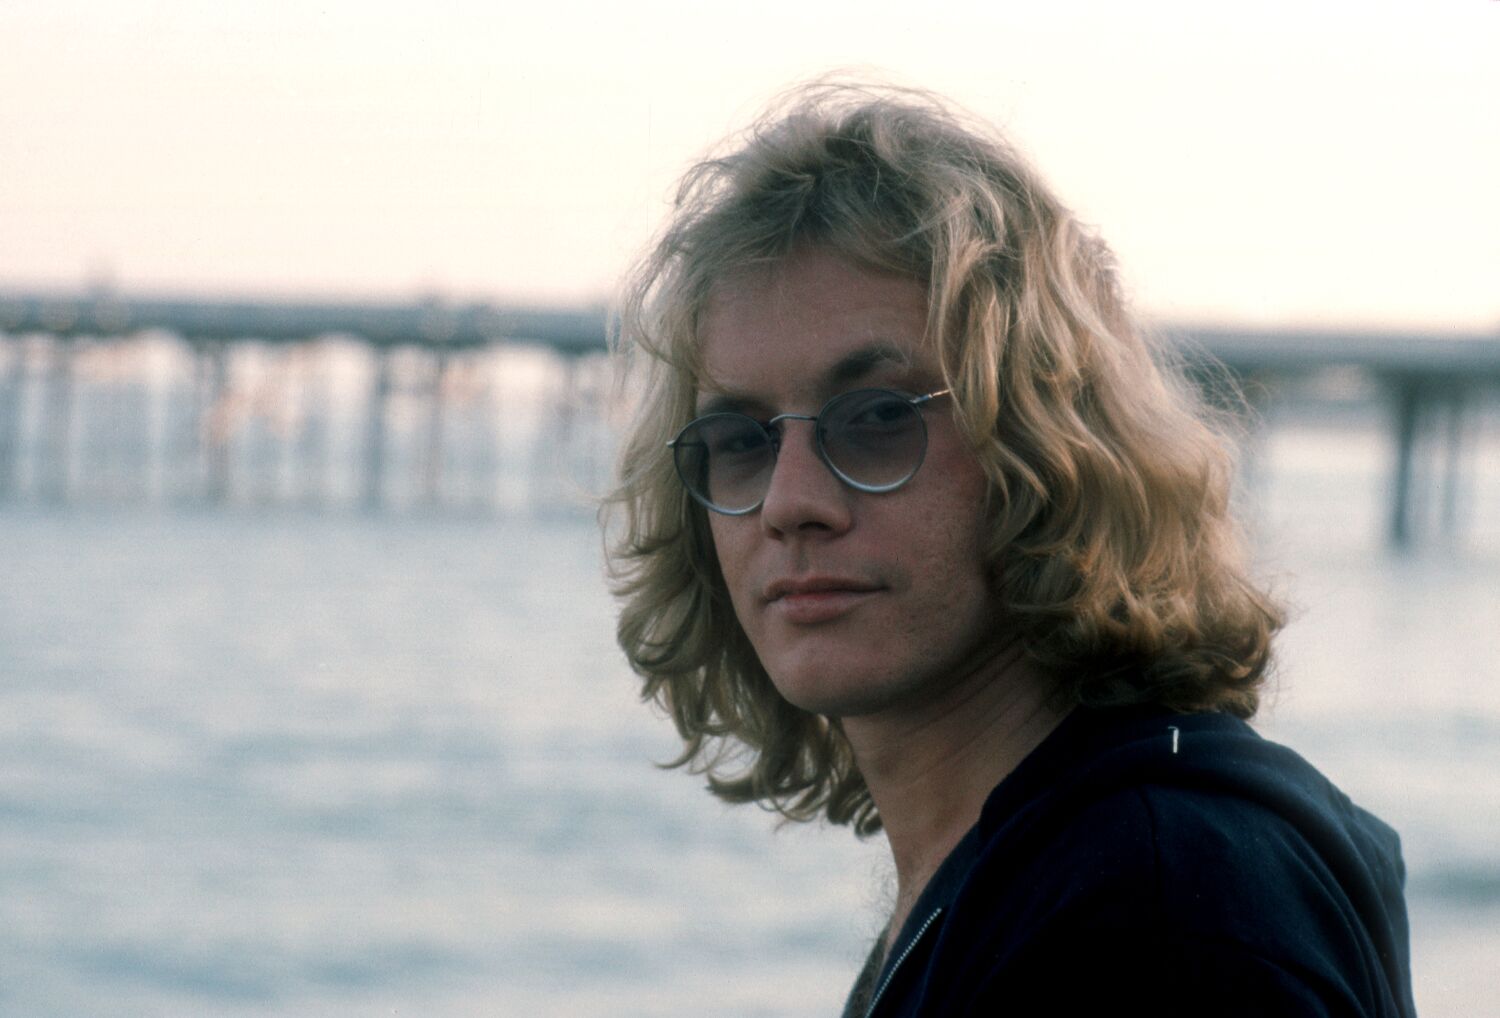 'The soul of L.A.': 20 years after his death, the stars are aligning for Warren Zevon